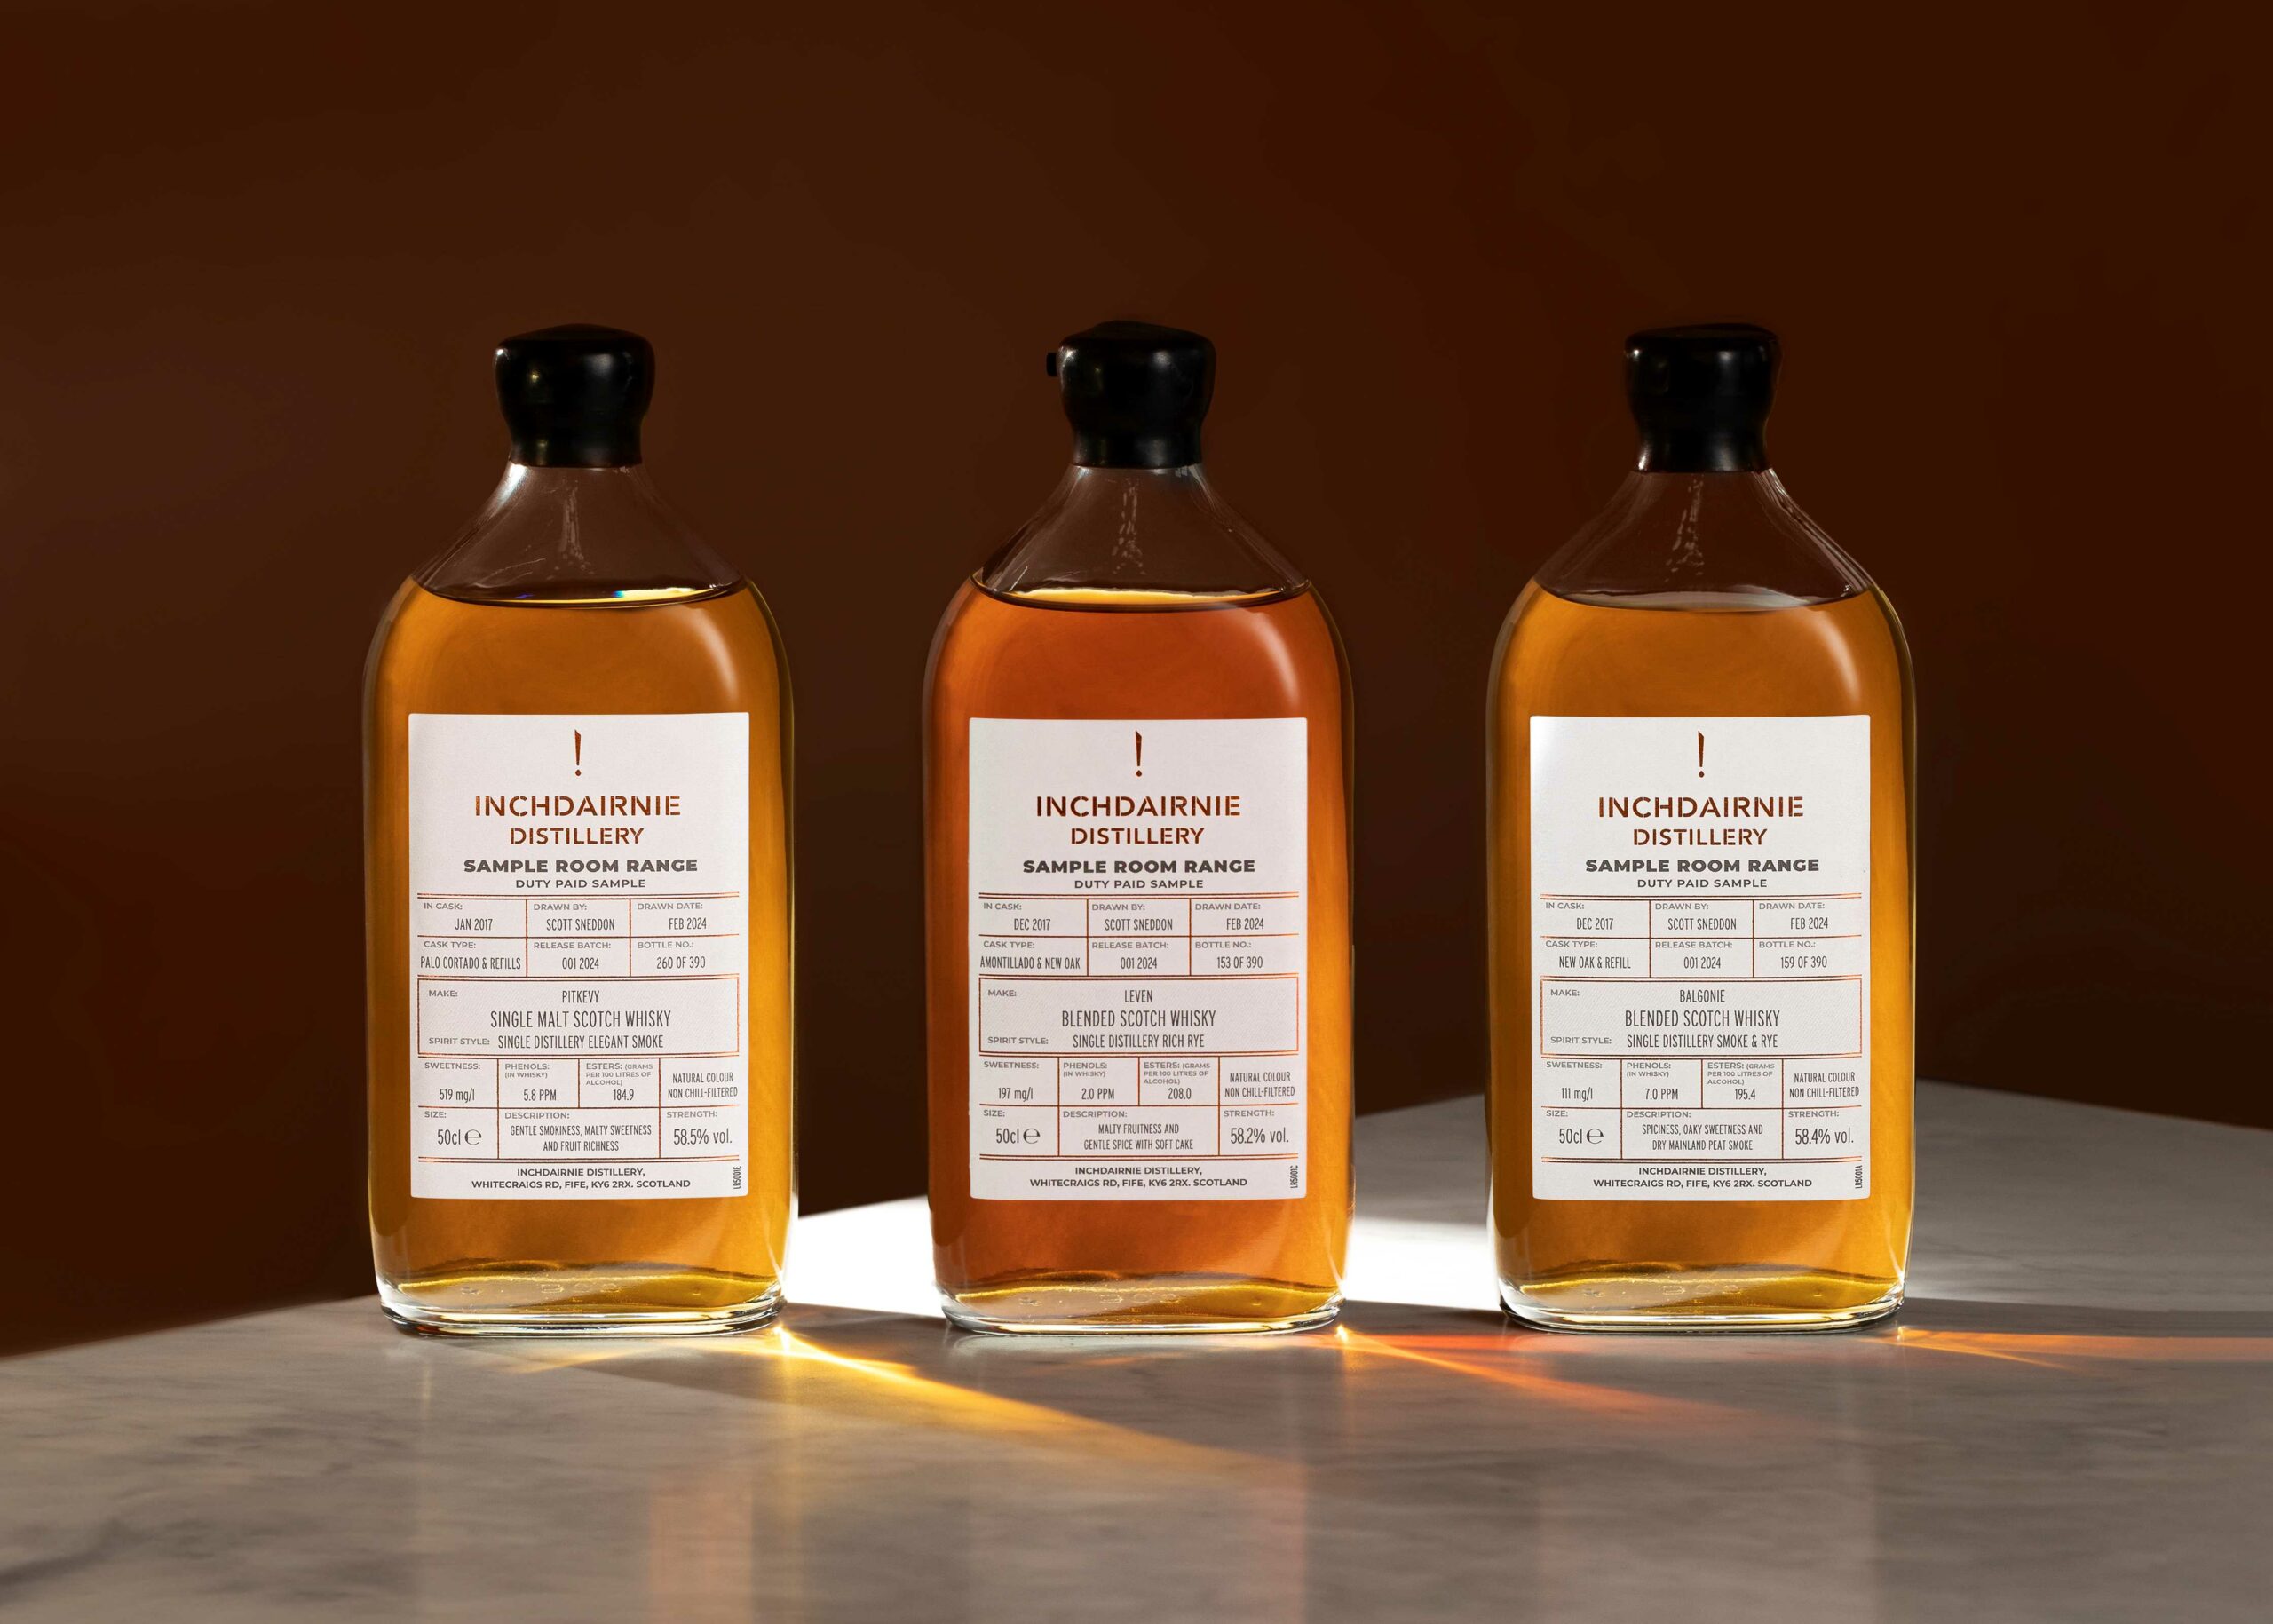 Introducing the Sample Room Range, Launching Exclusively with the Whisky Shop